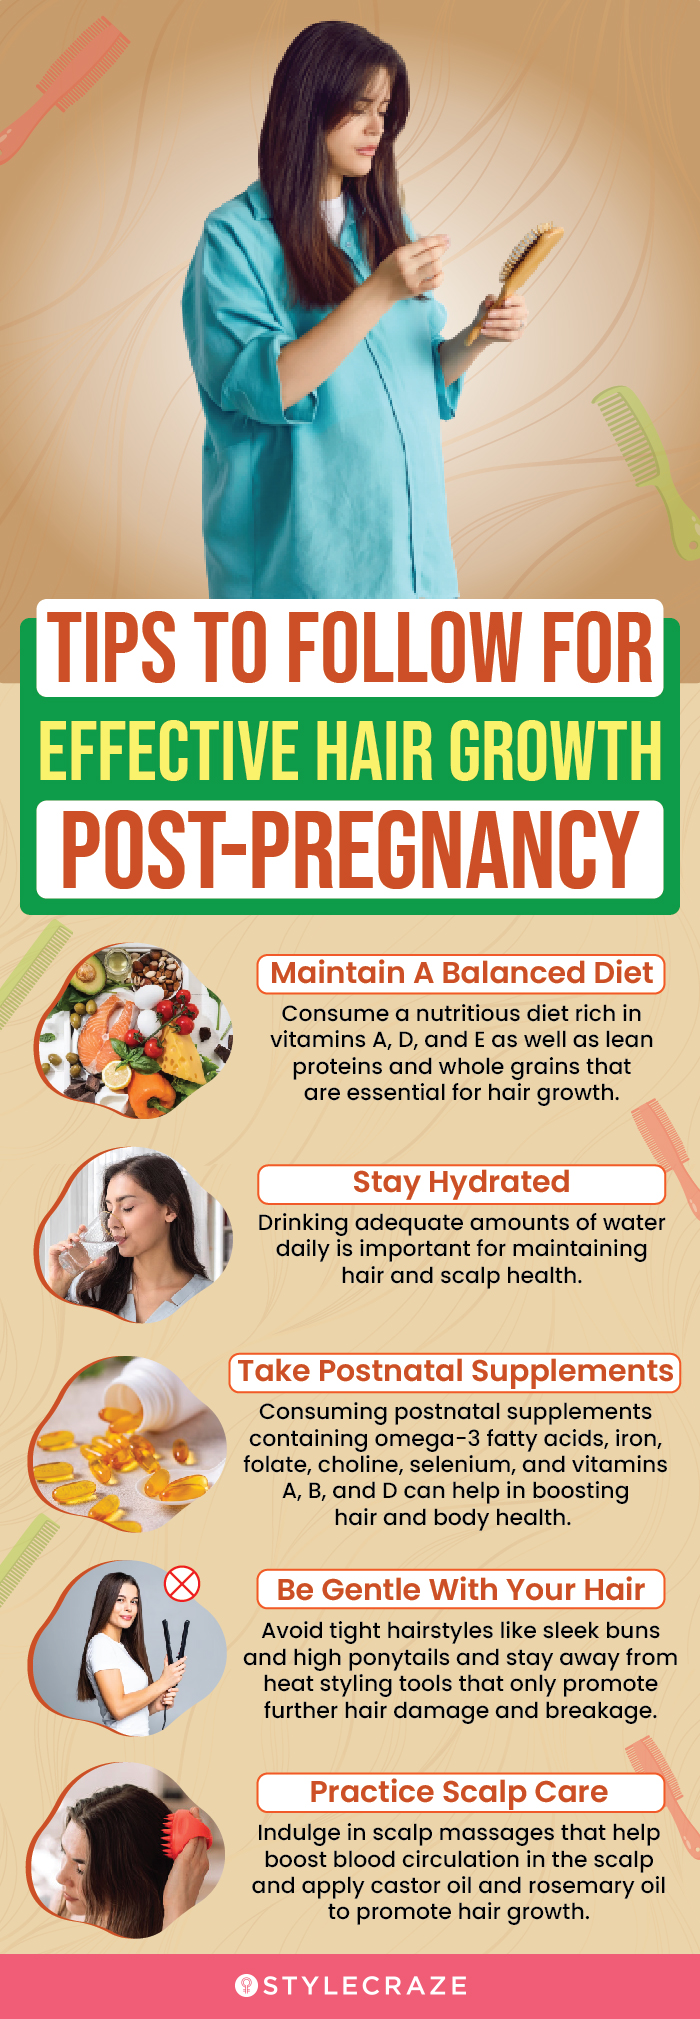 tips to follow for effective hair growth post pregnancy(infographic)